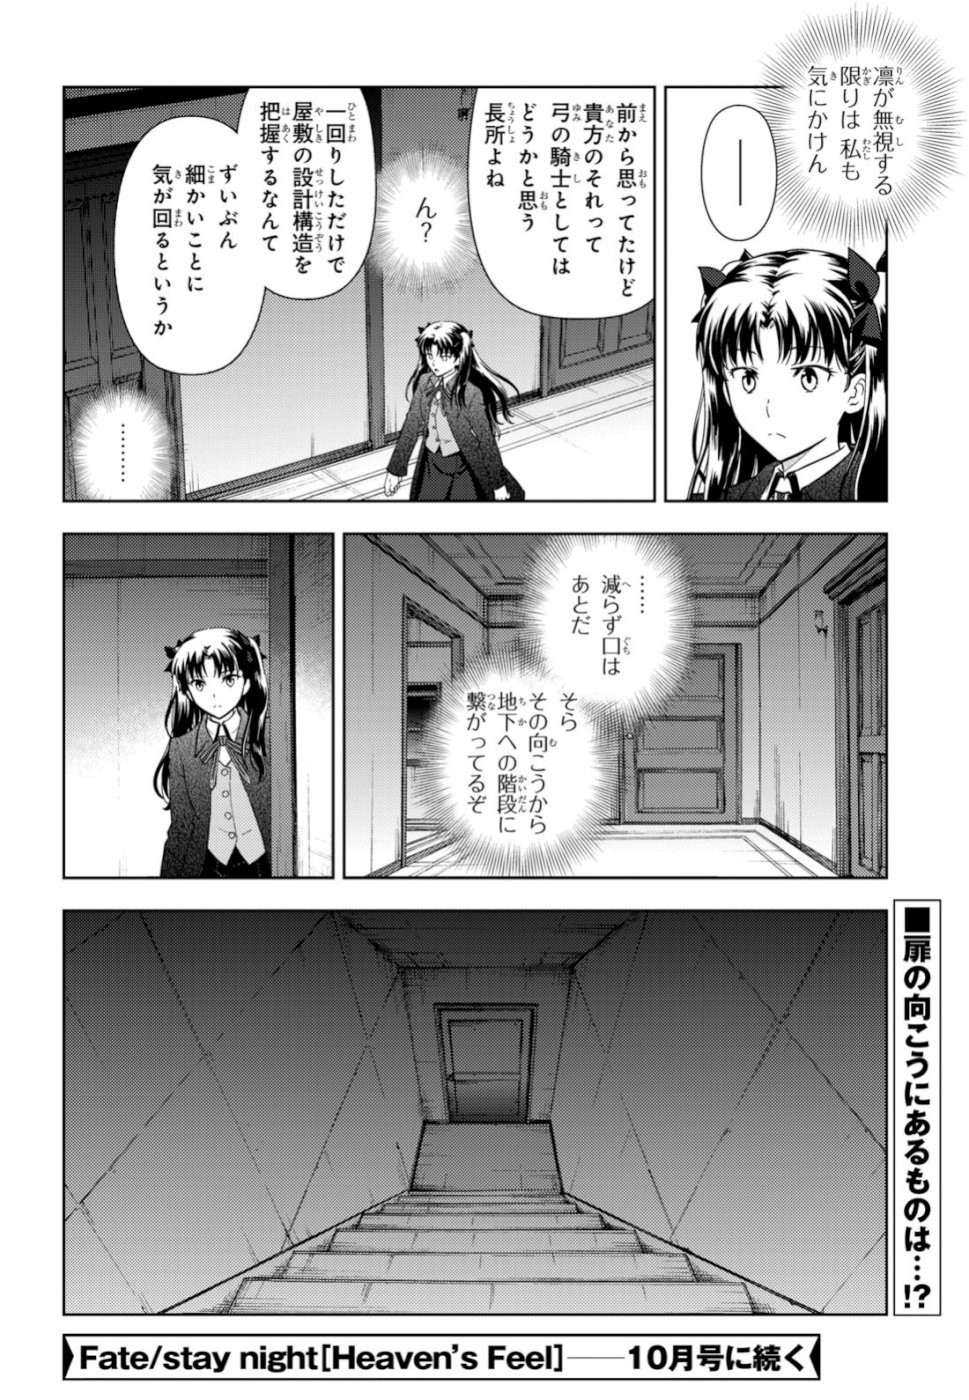 Fate/Stay night Heaven's Feel - Chapter 50 - Page 10